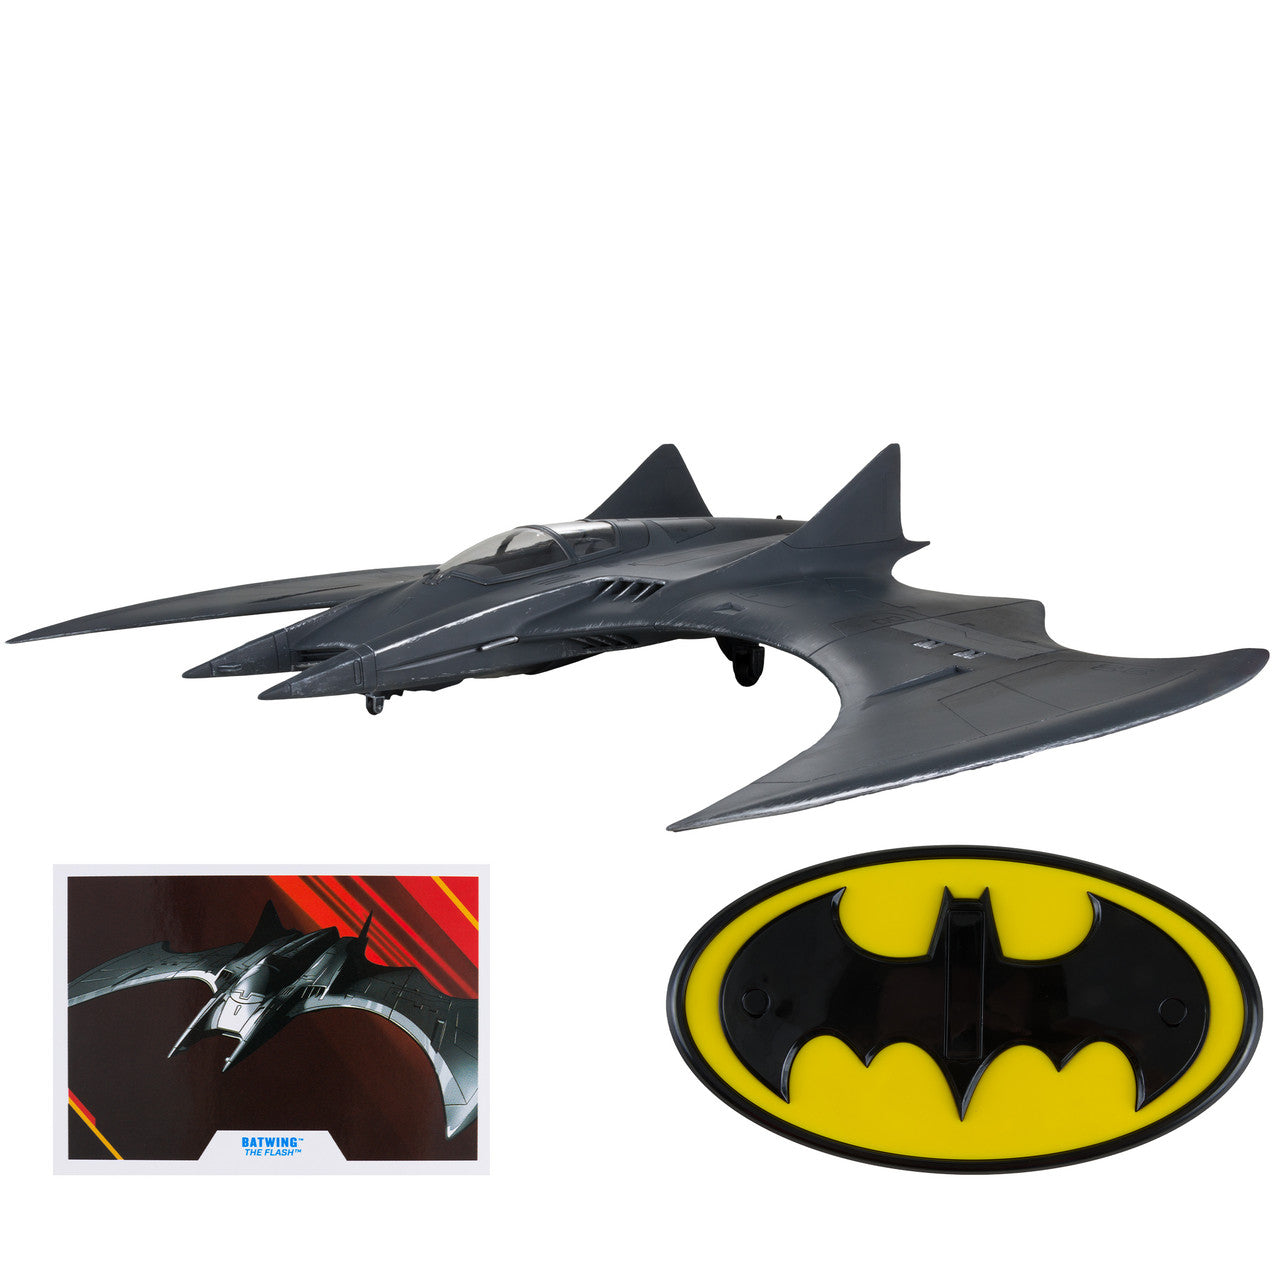 BATWING (GOLD LABEL) (THE FLASH MOVIE) with accessories - heretoserveyou